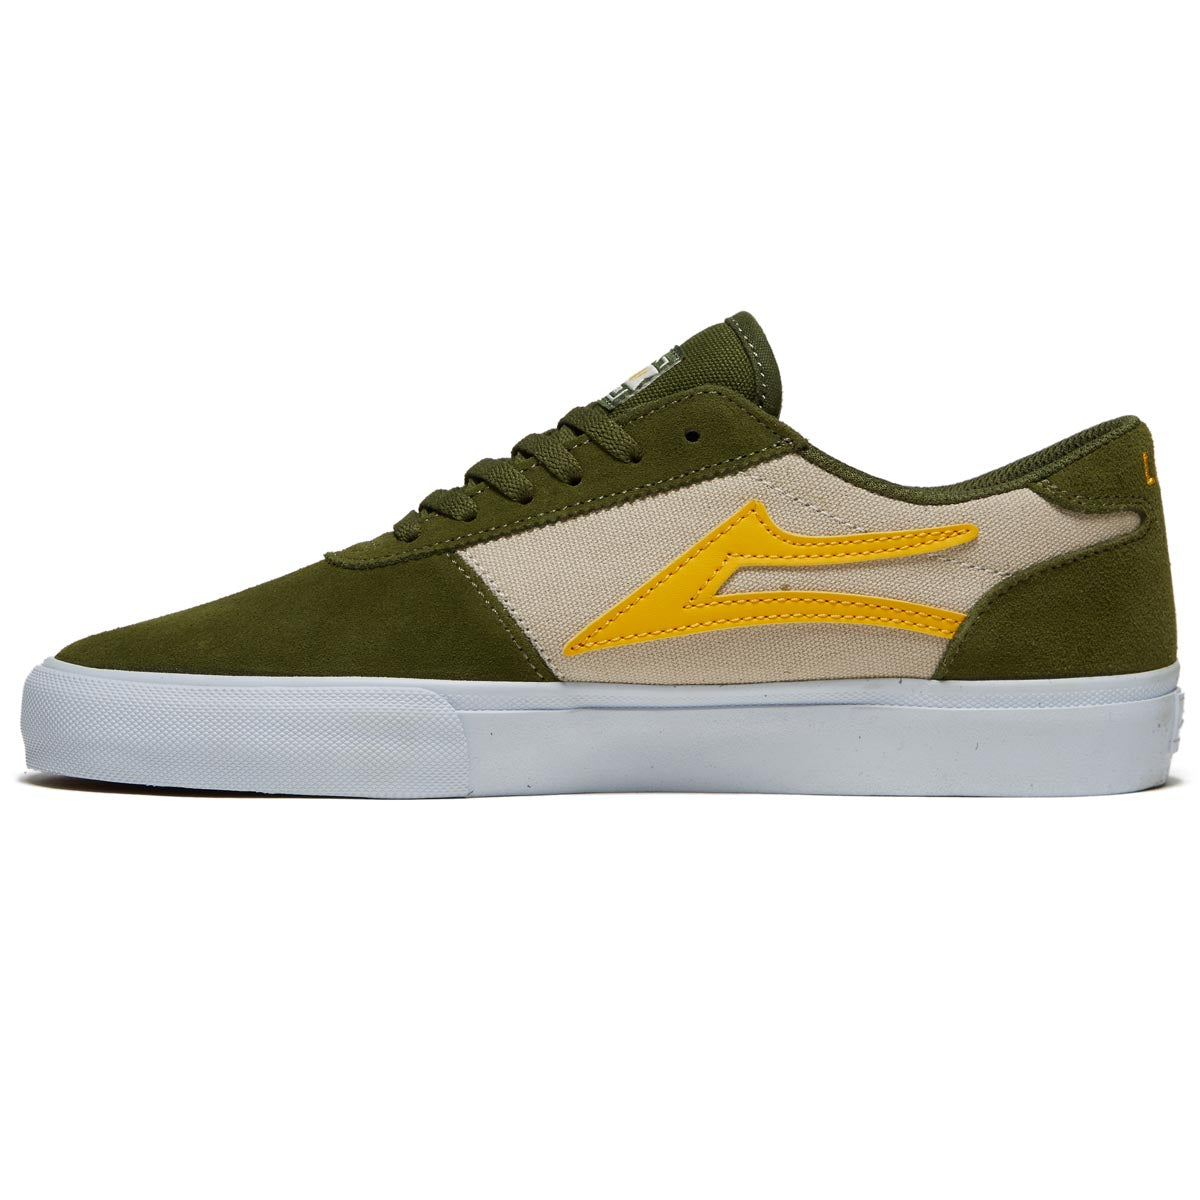 Lakai Manchester Shoes - Chive Suede image 2